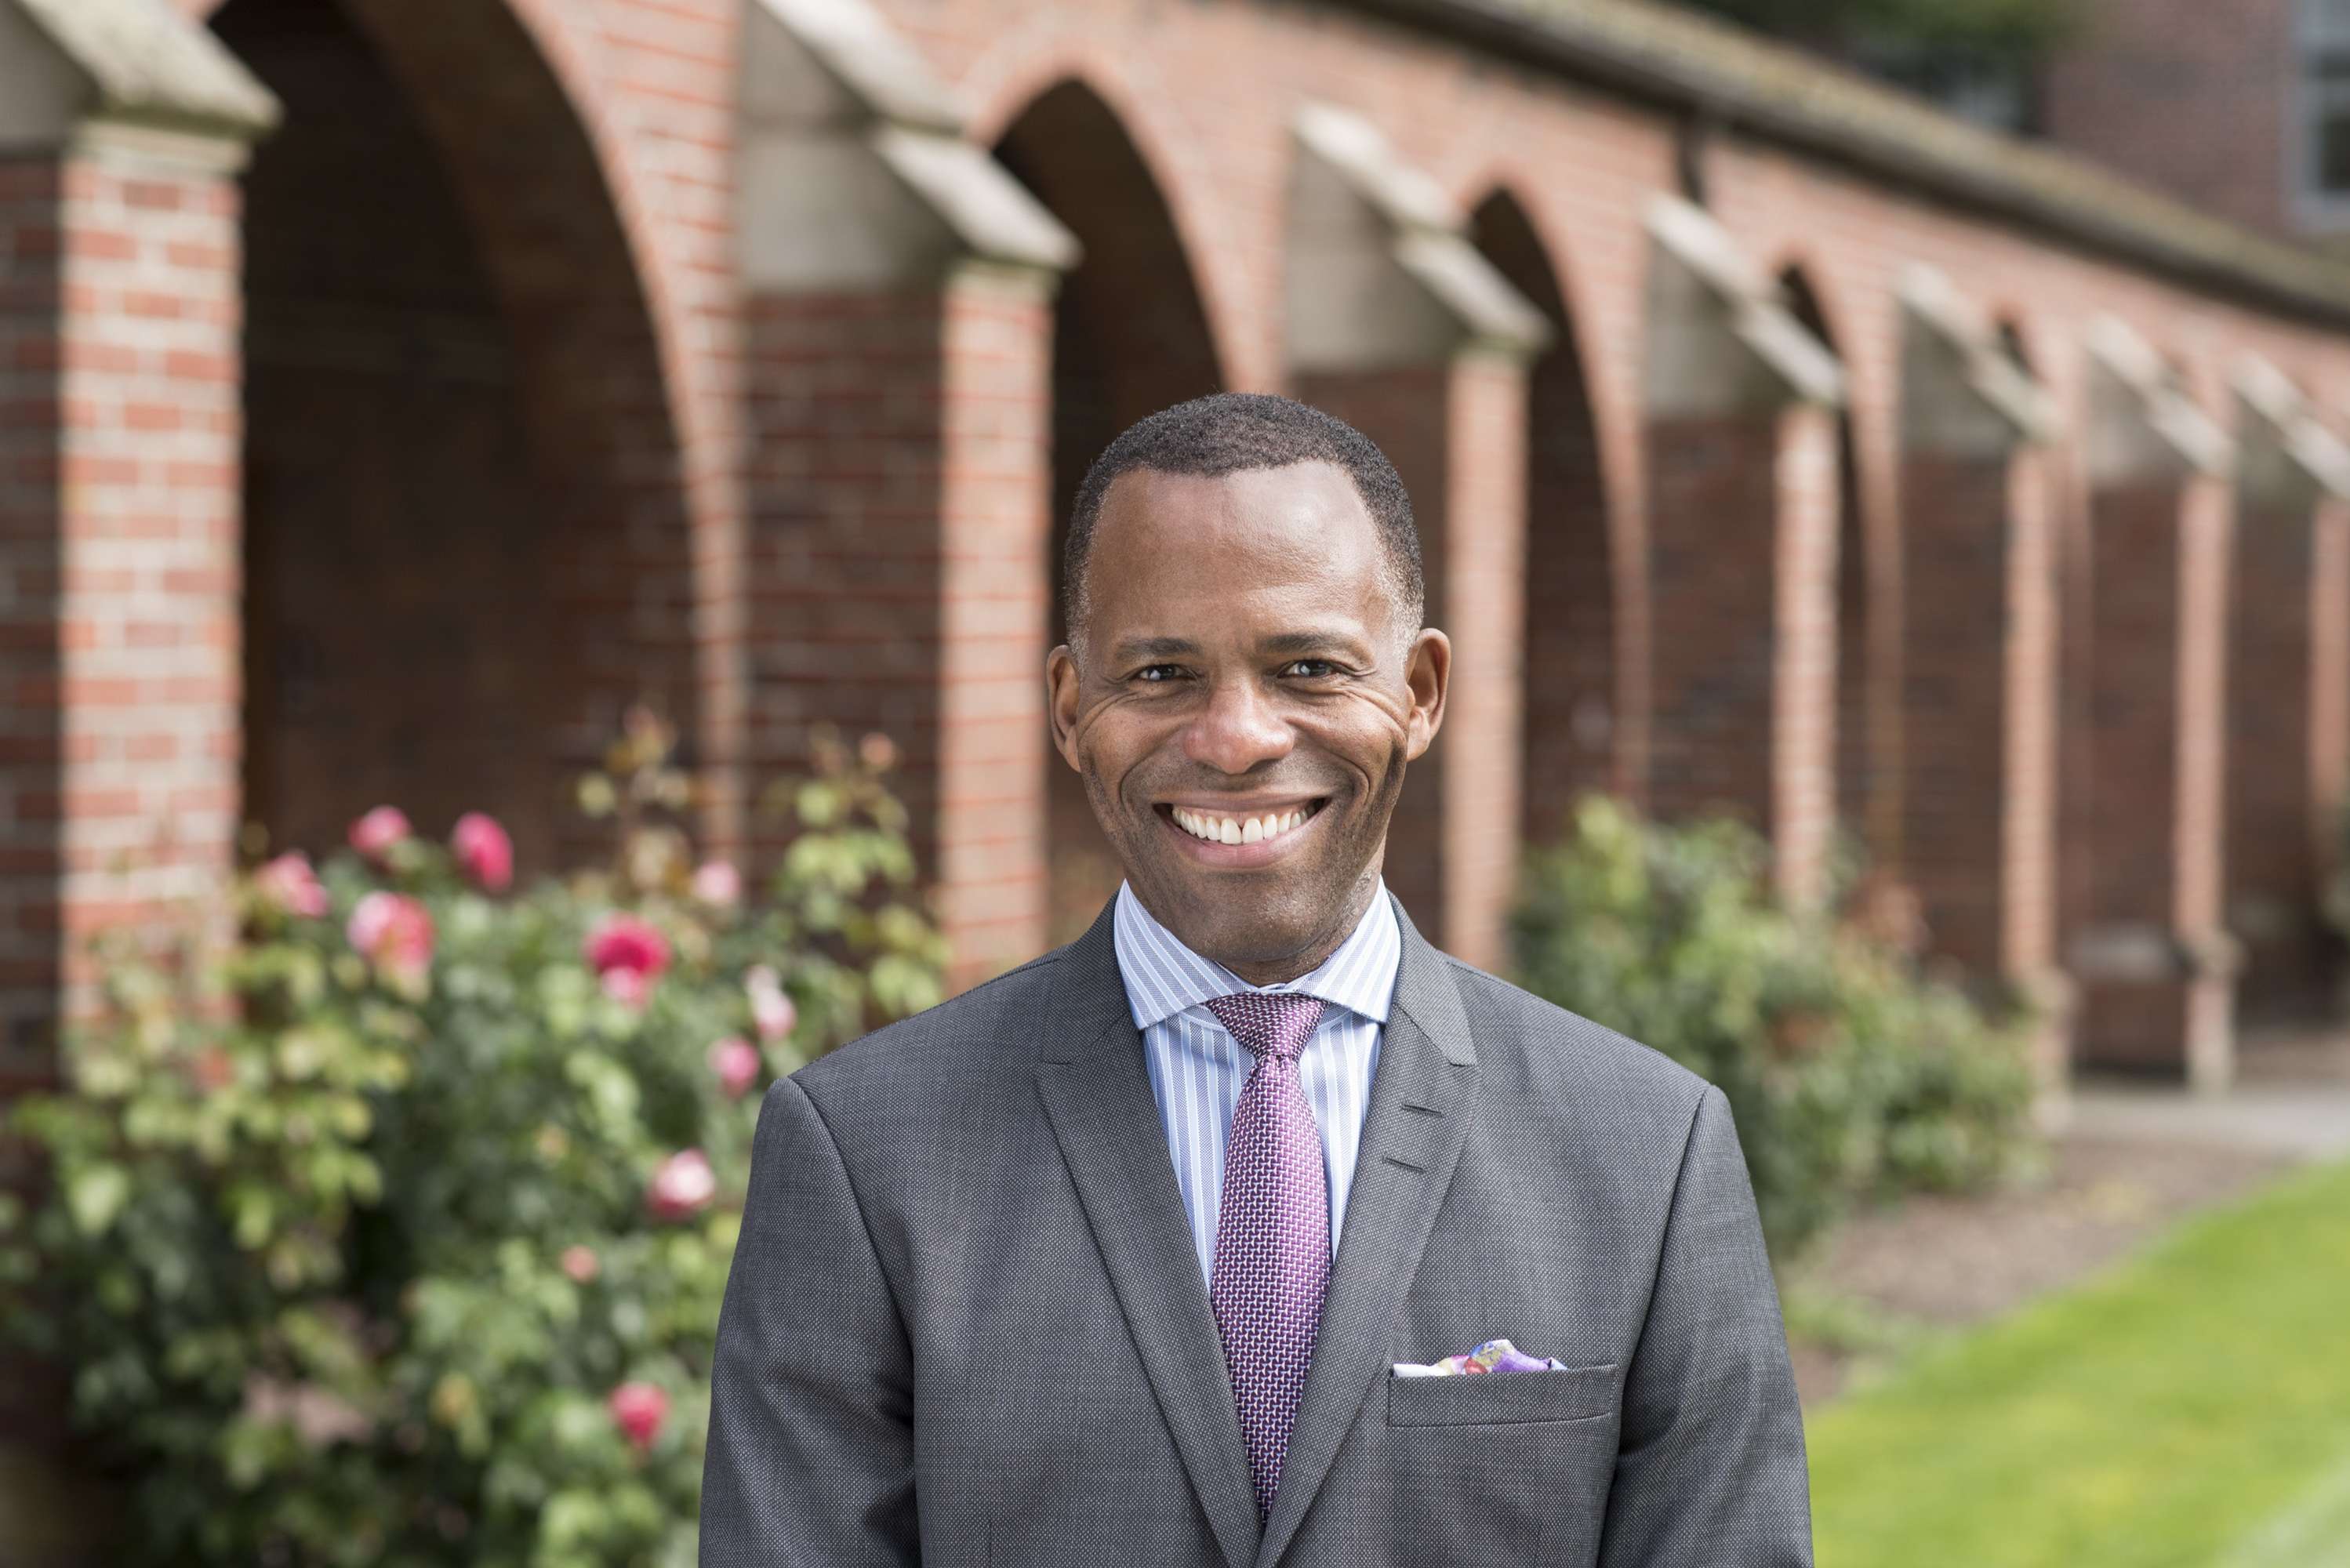 President Isiaah Crawford smiles at the camera as he stands in front of the campus arches. 